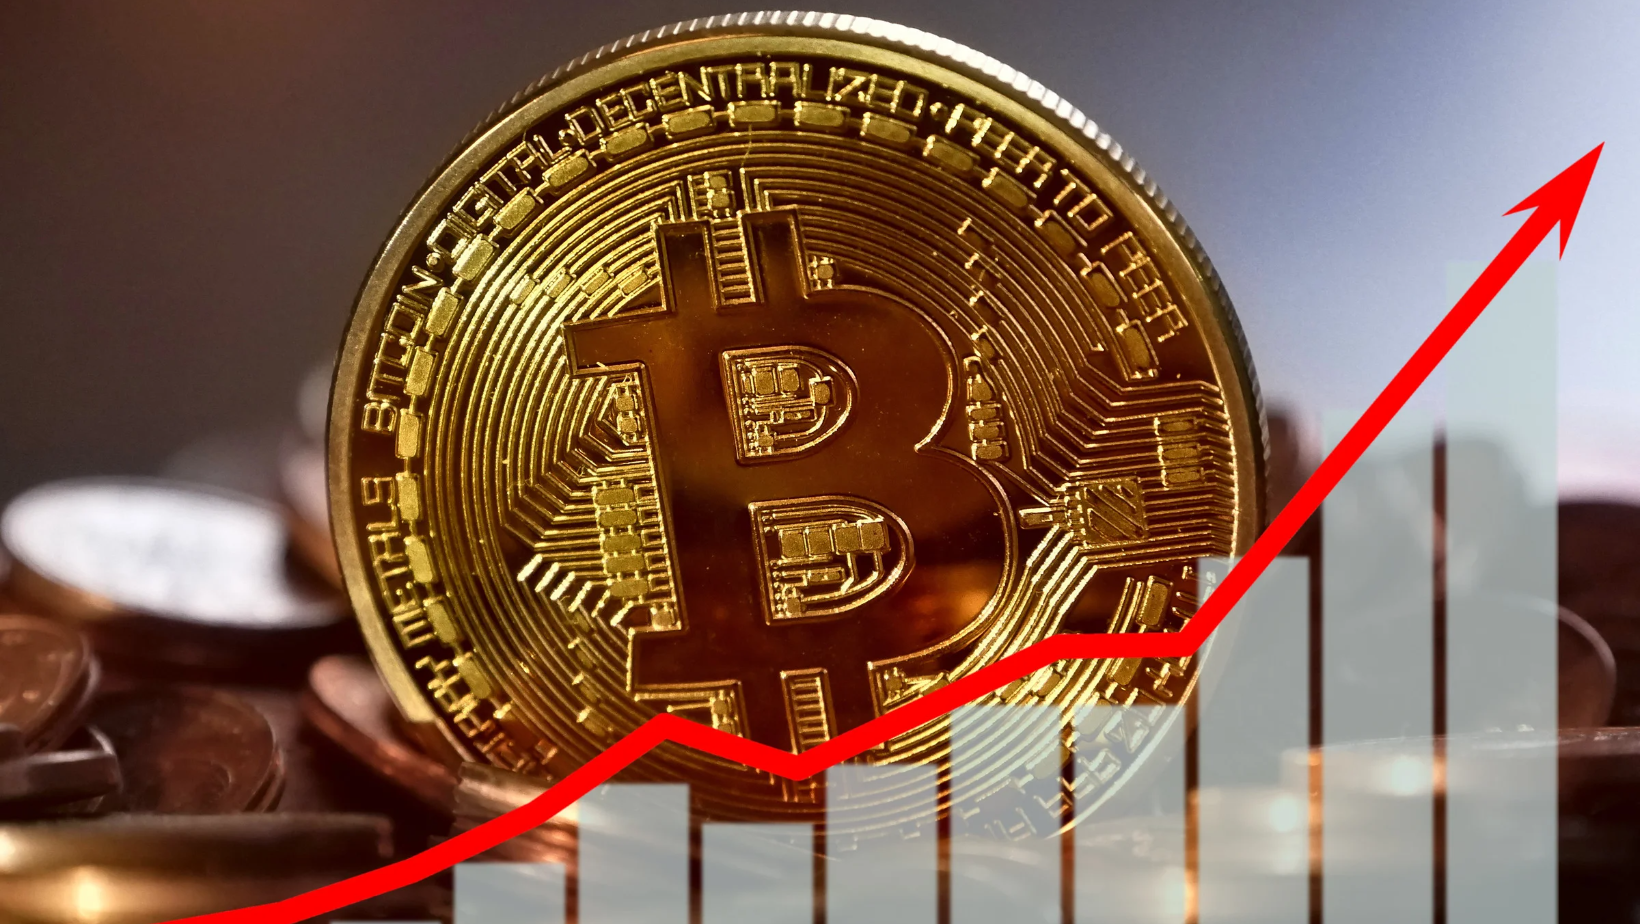 Arras Lives on Bitcoin for a Week and Proves Bitcoin Is Gaining Acceptance  – Bitcoin News